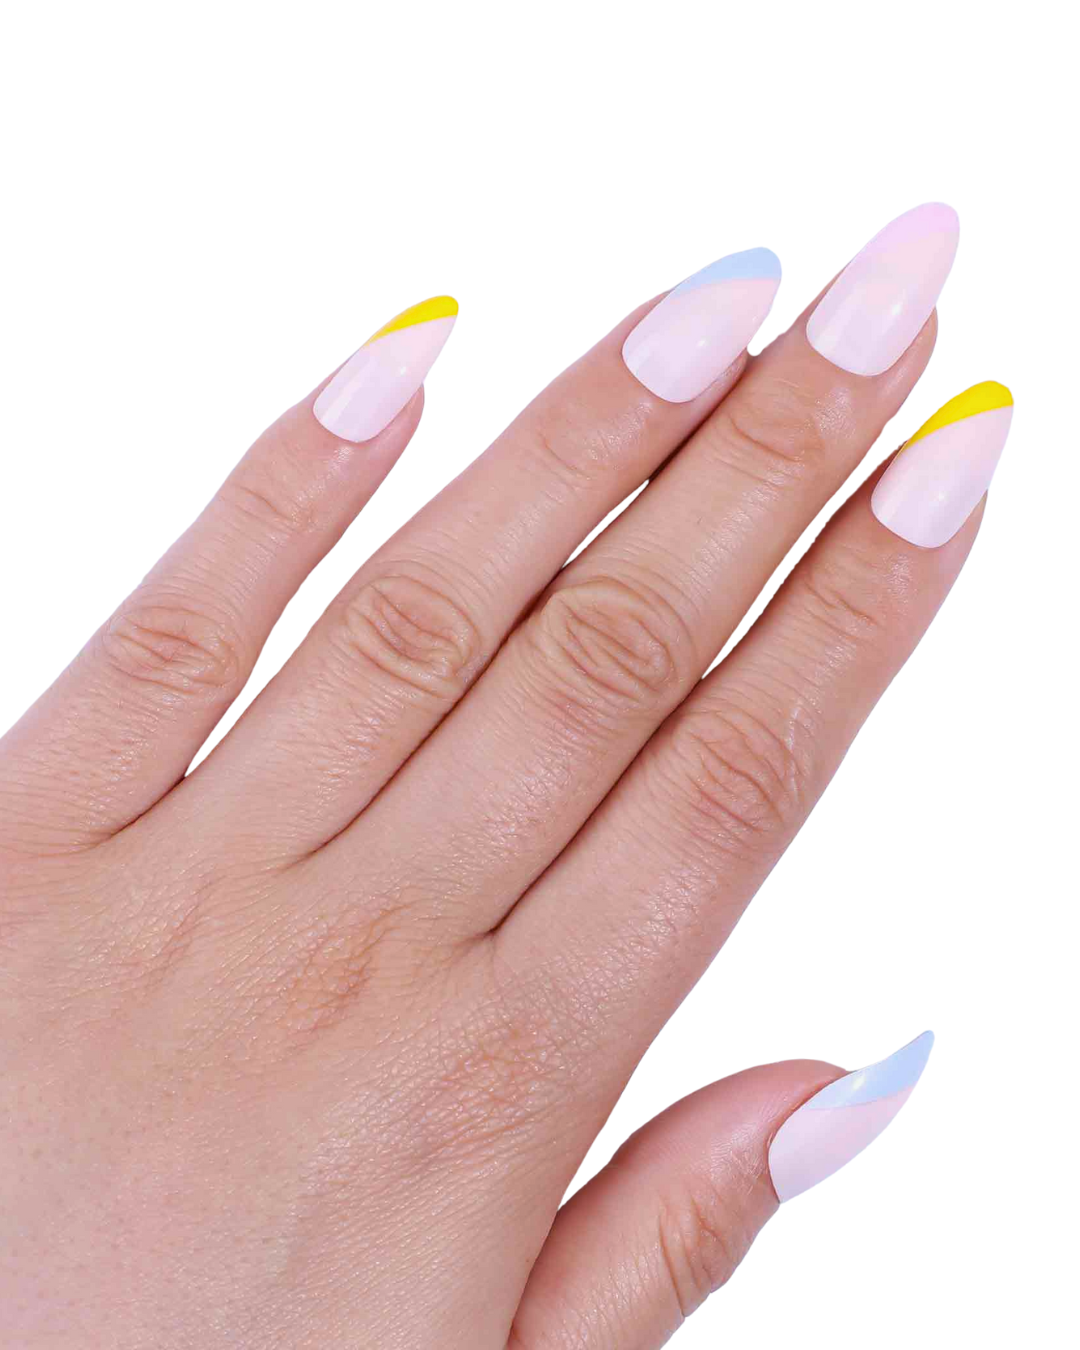 PASTEL ANGLED FRENCH